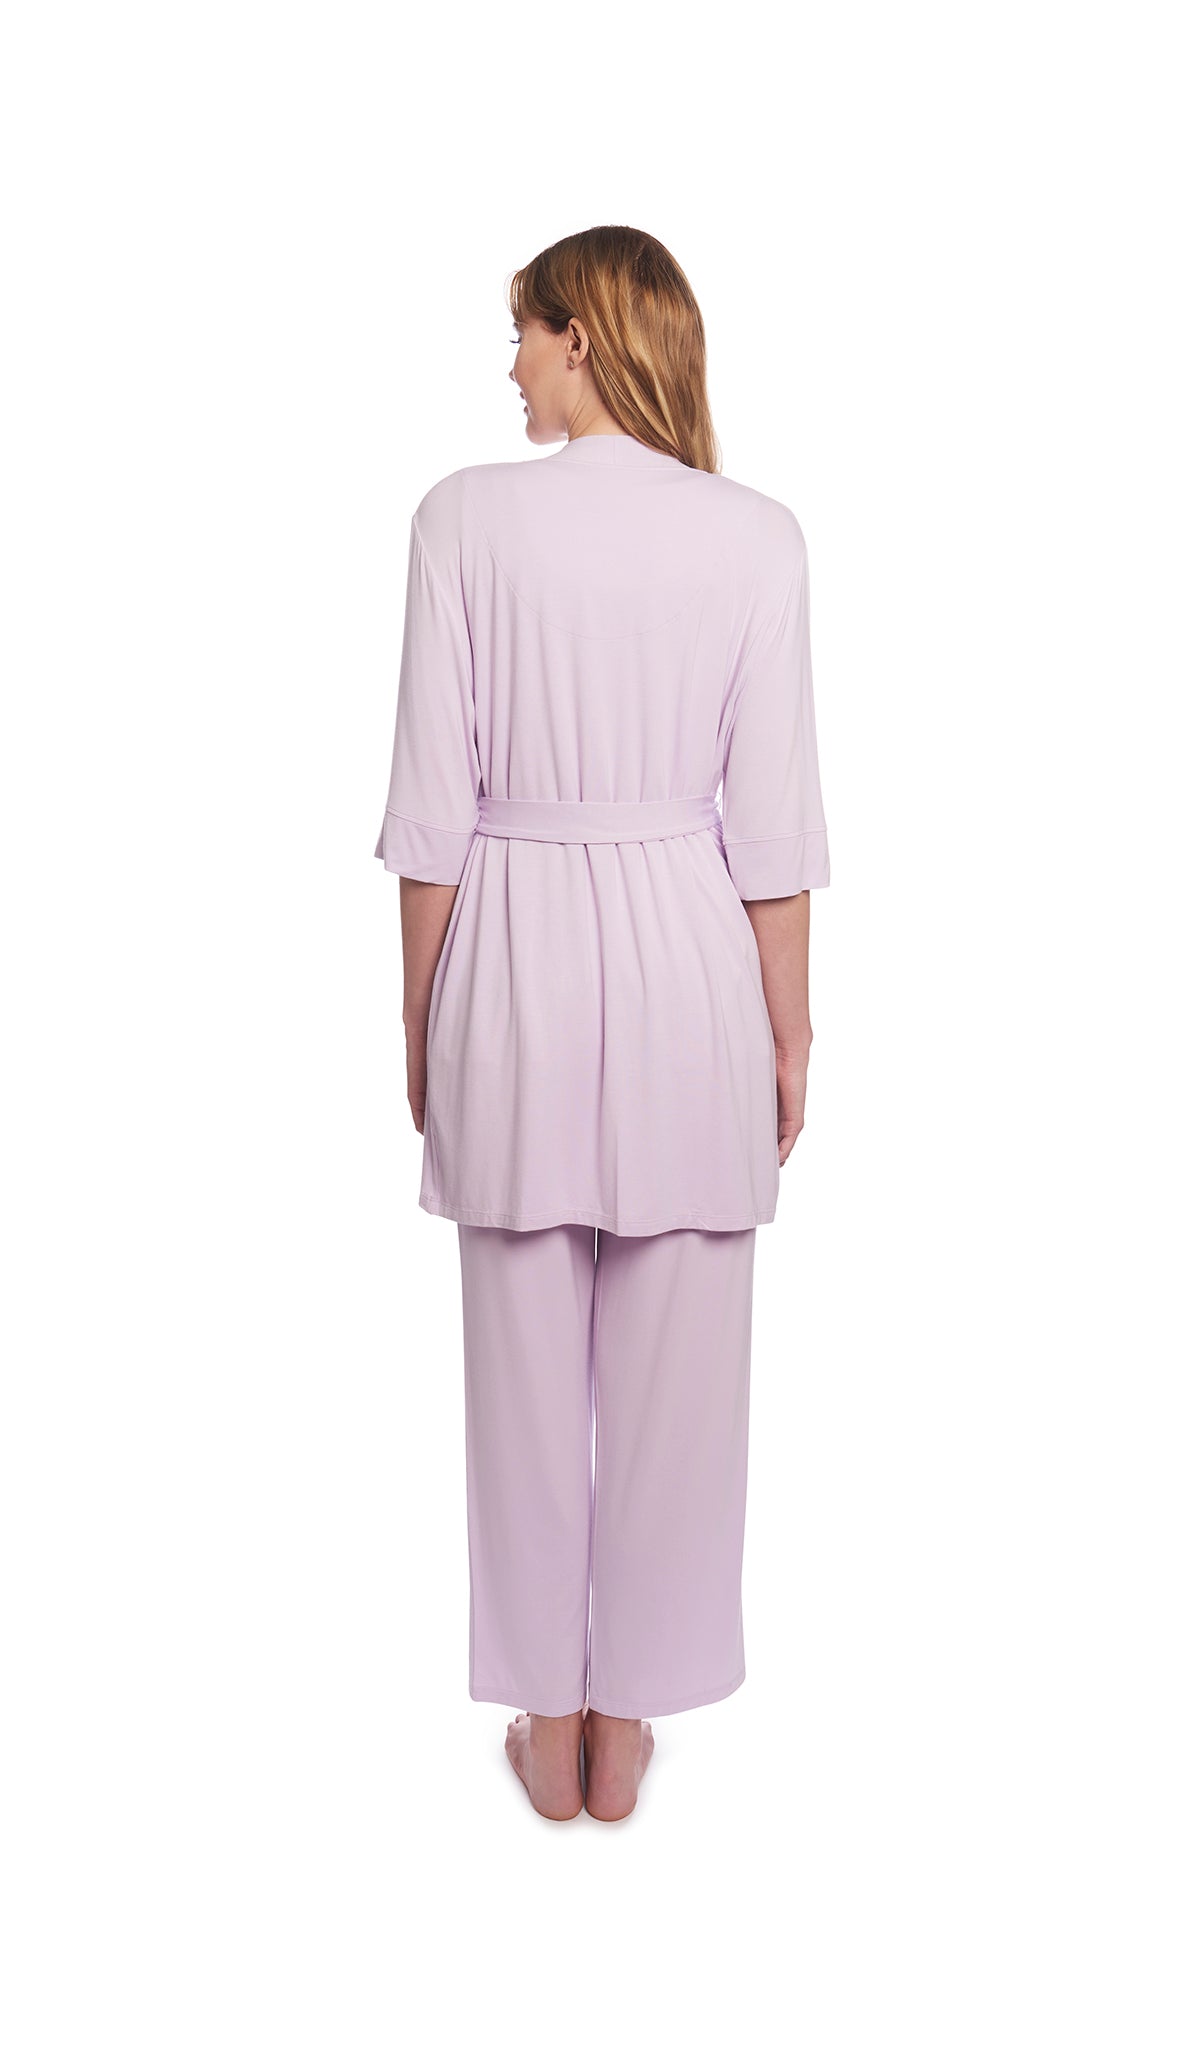 Lavender Analise 3-Piece Set, back shot of woman wearing robe and pant.